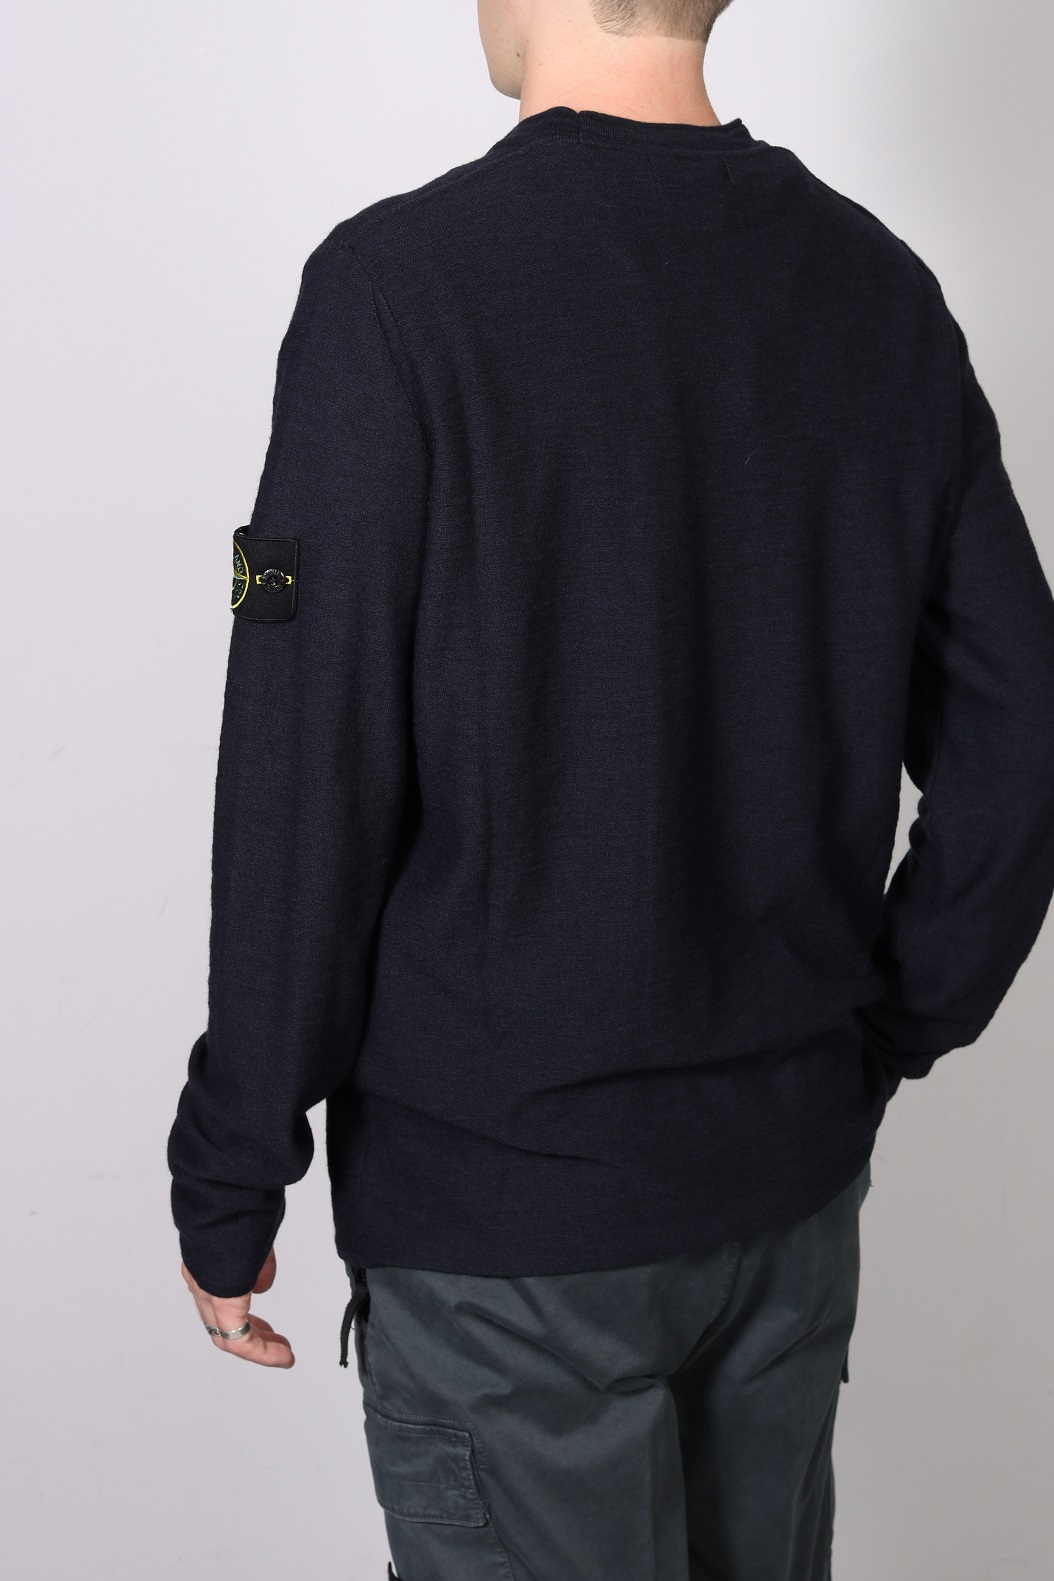 STONE ISLAND Knit Pullover in Navy Blue 2XL